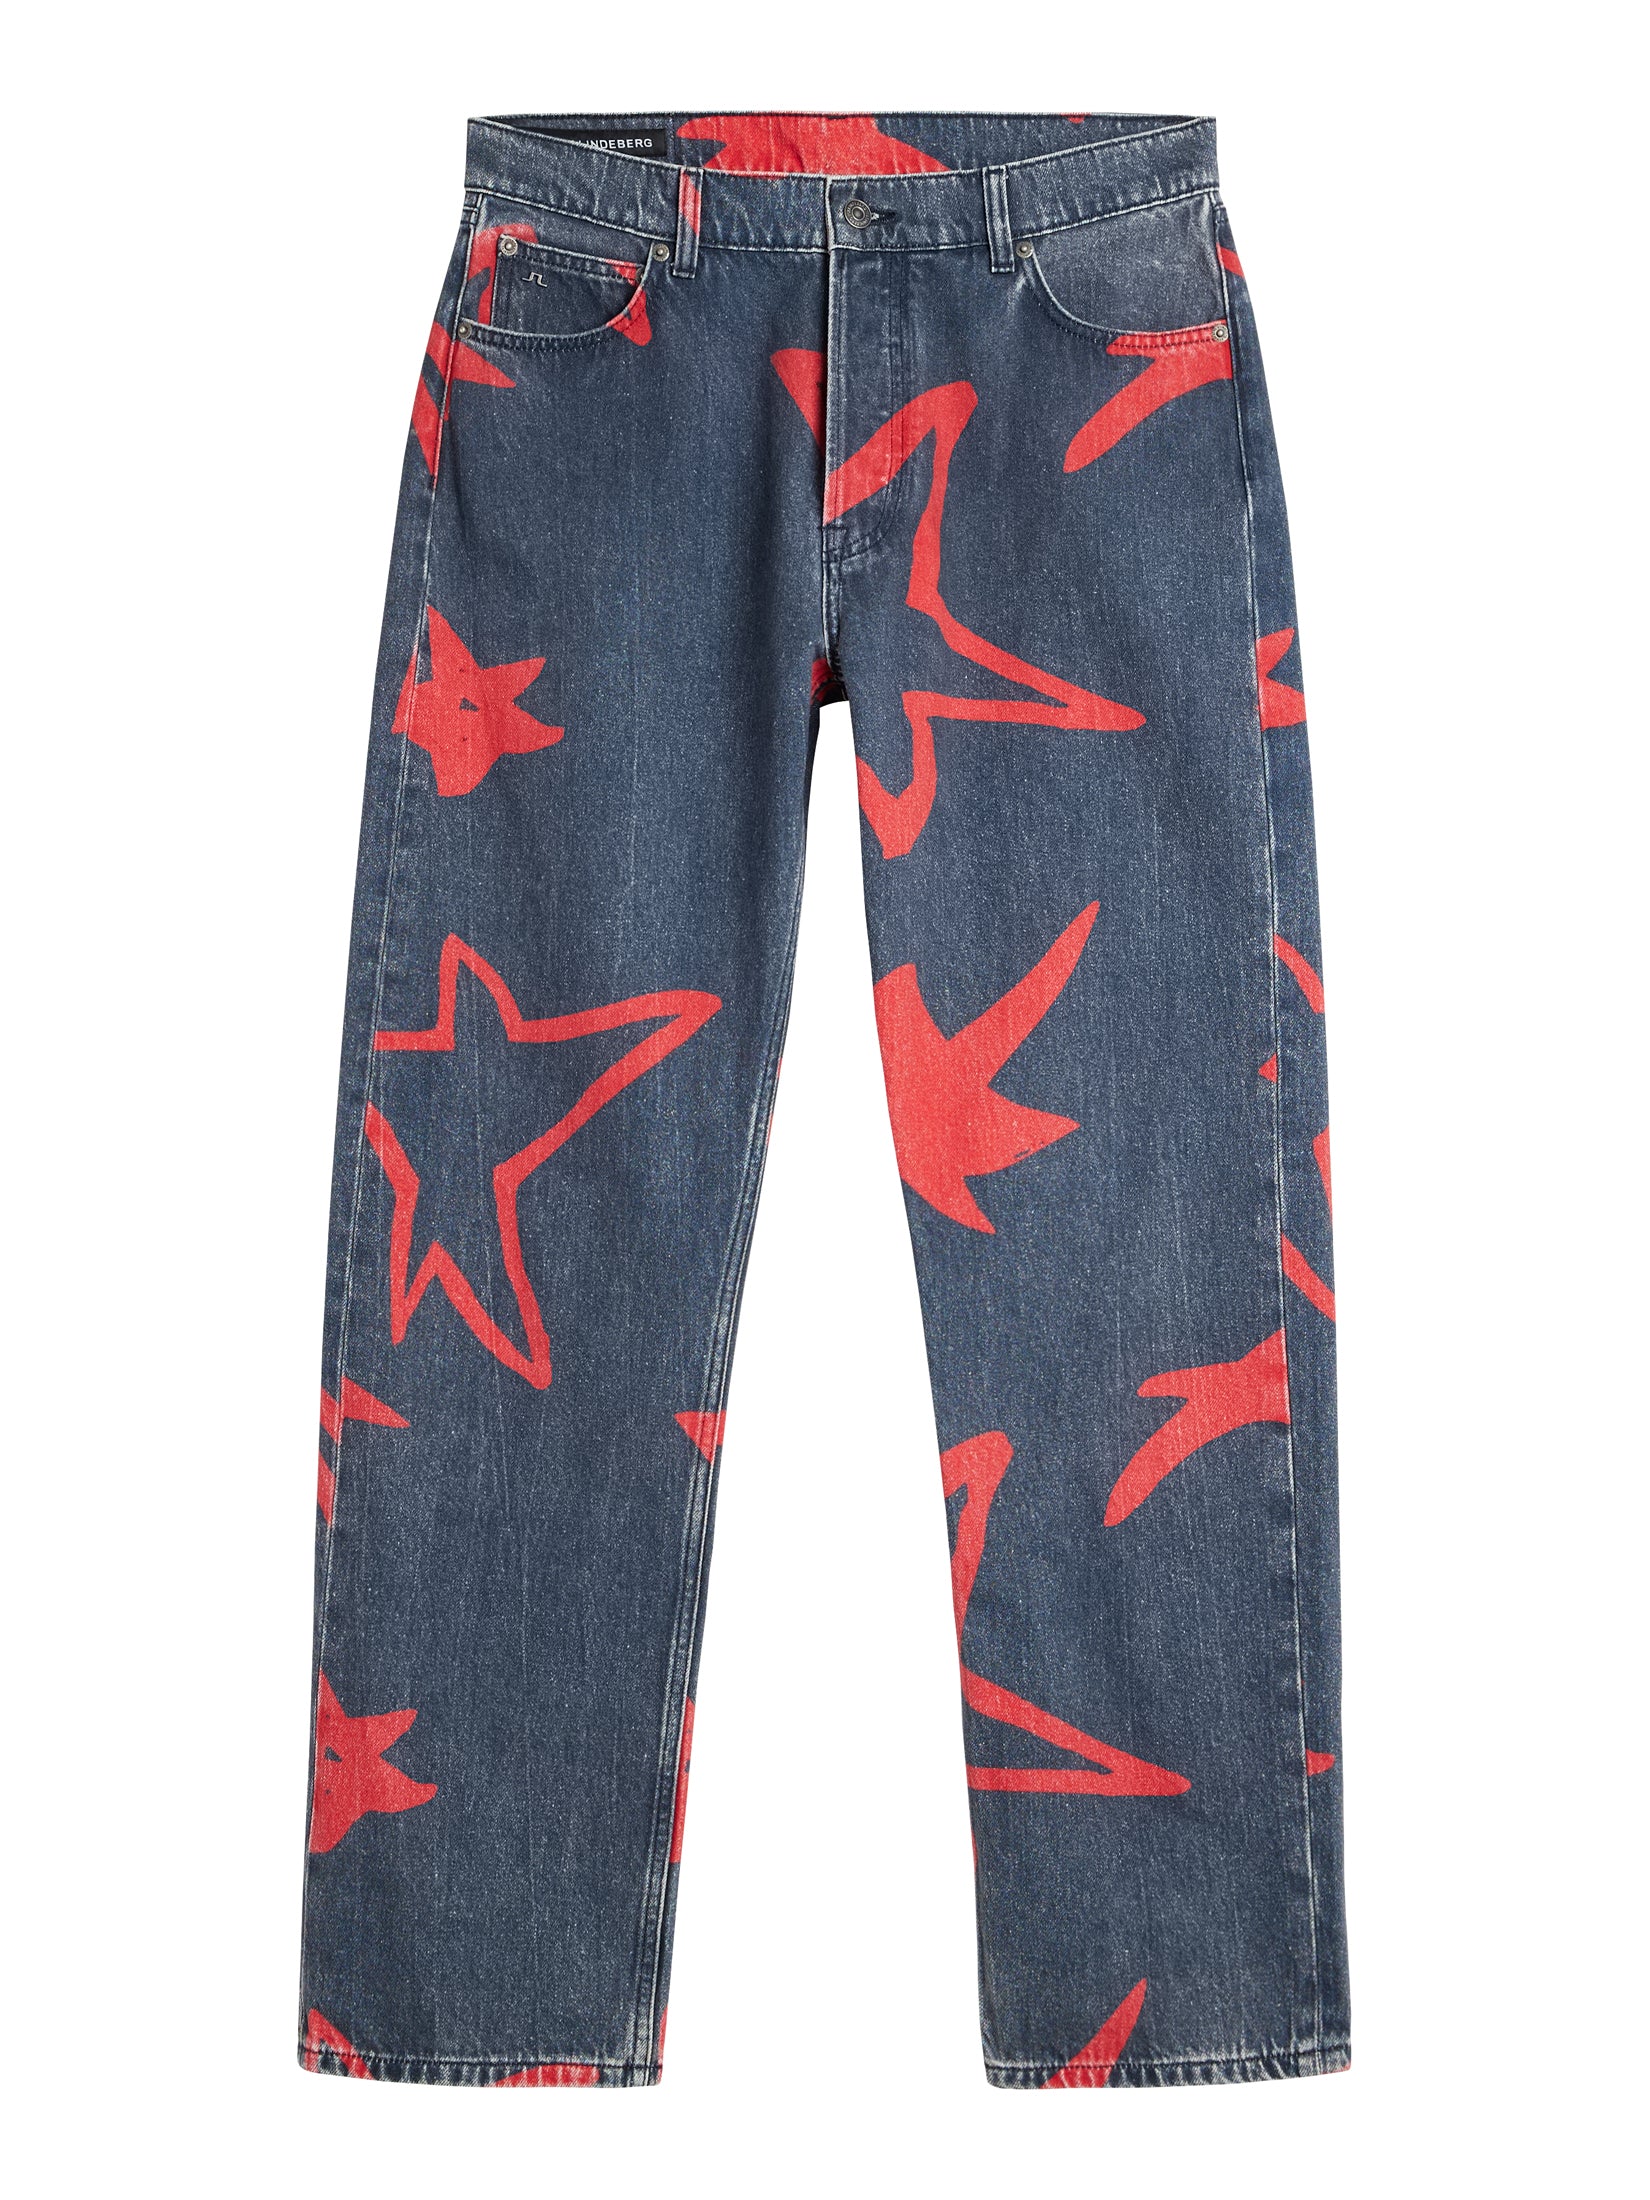 Johnny Star Printed Jeans